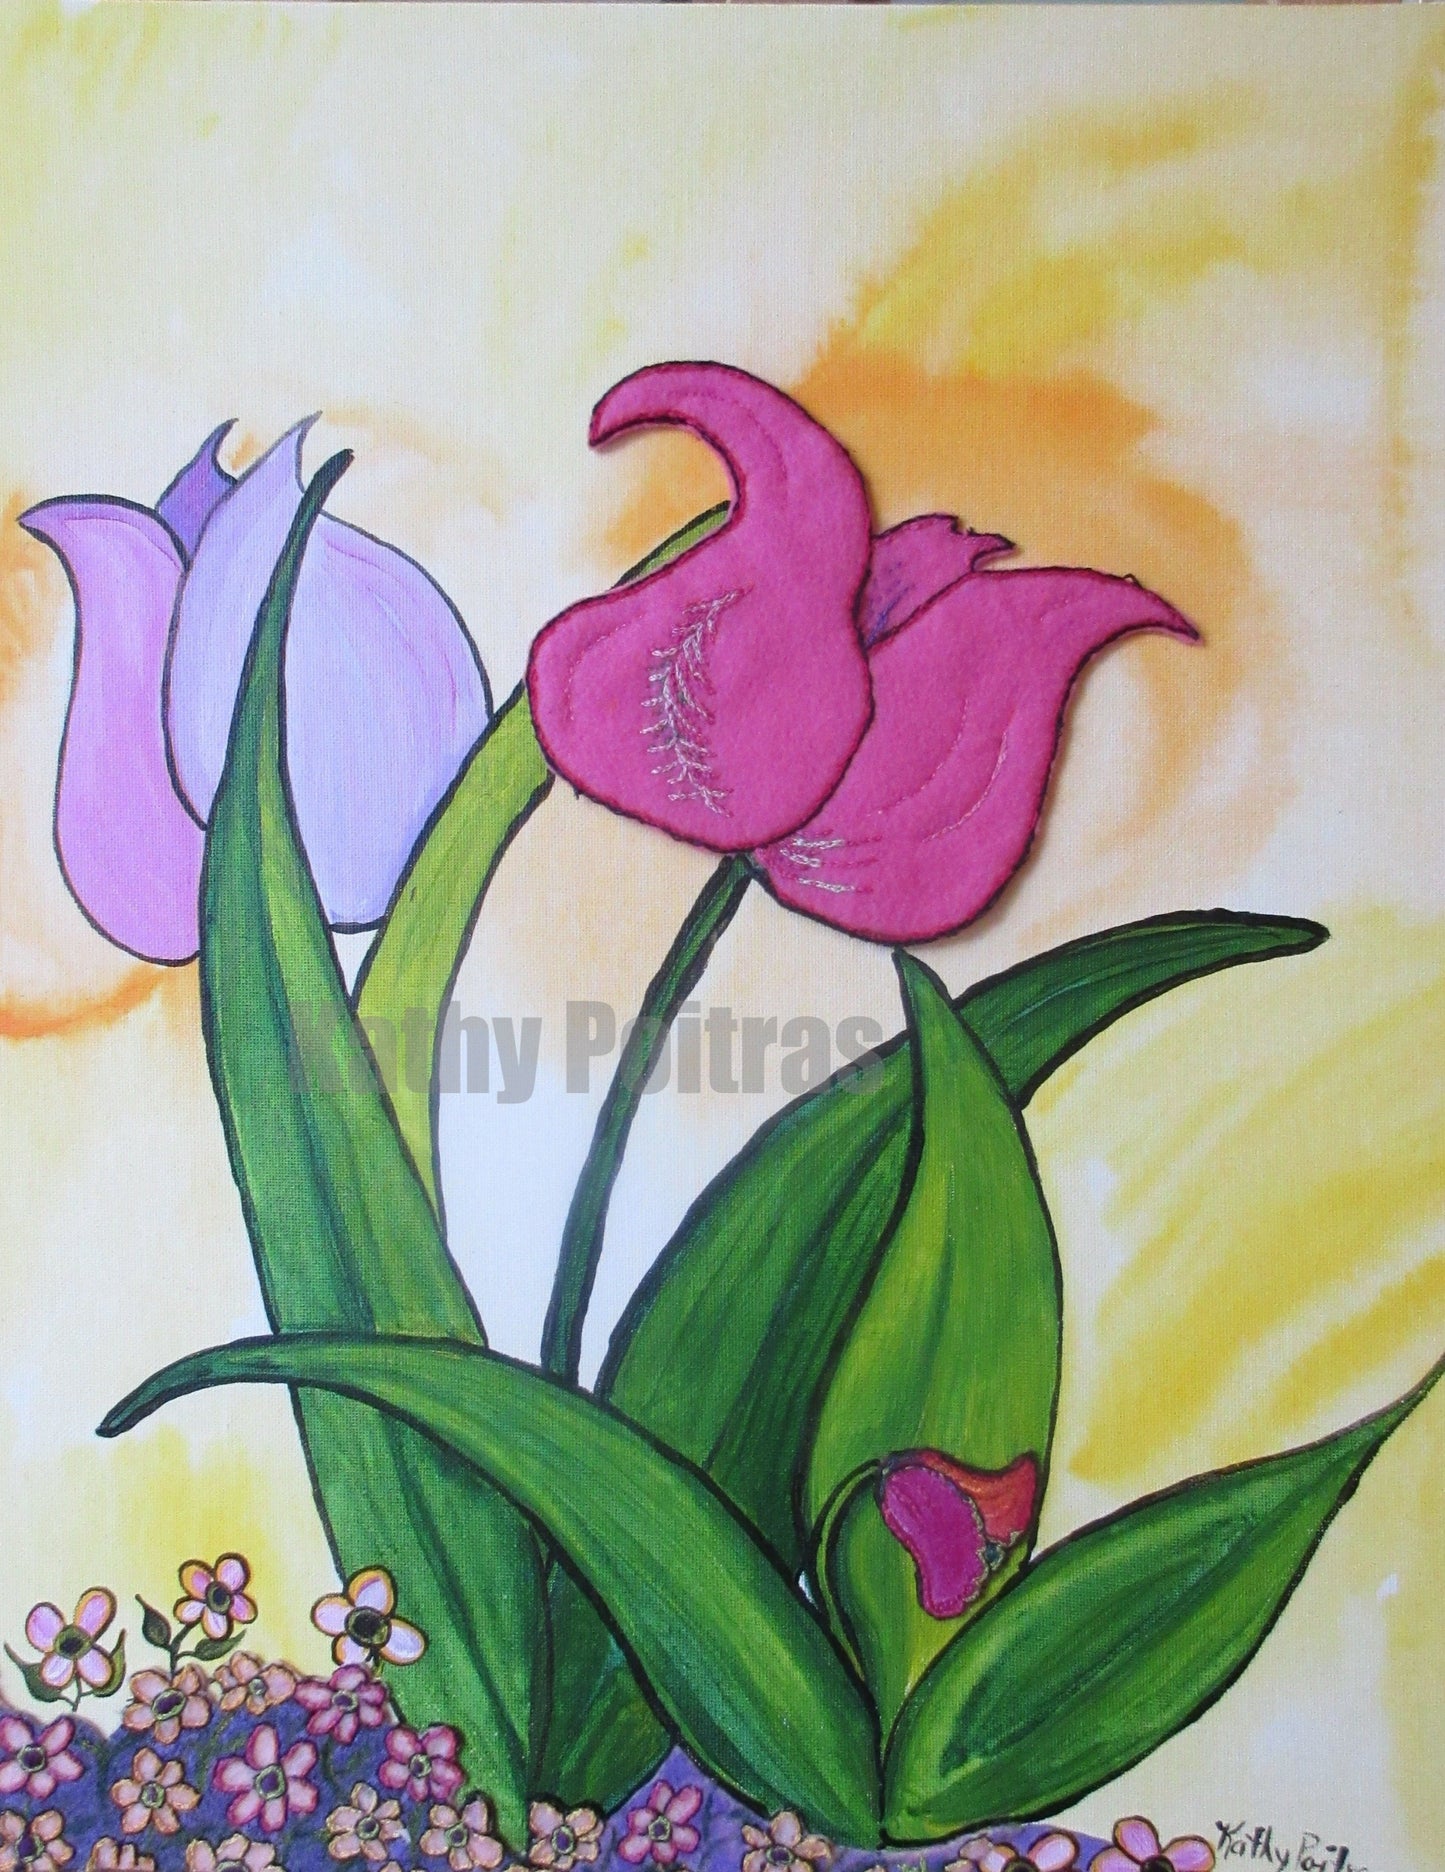 An acrylic painting with felt and hand embroidery included. Two pink folk art tulips plus one tiny tulip growing. Small pink felt and embroidery flowers at the bottom, against a yellow and orange background.  16 x 20 inches on canvas board.  